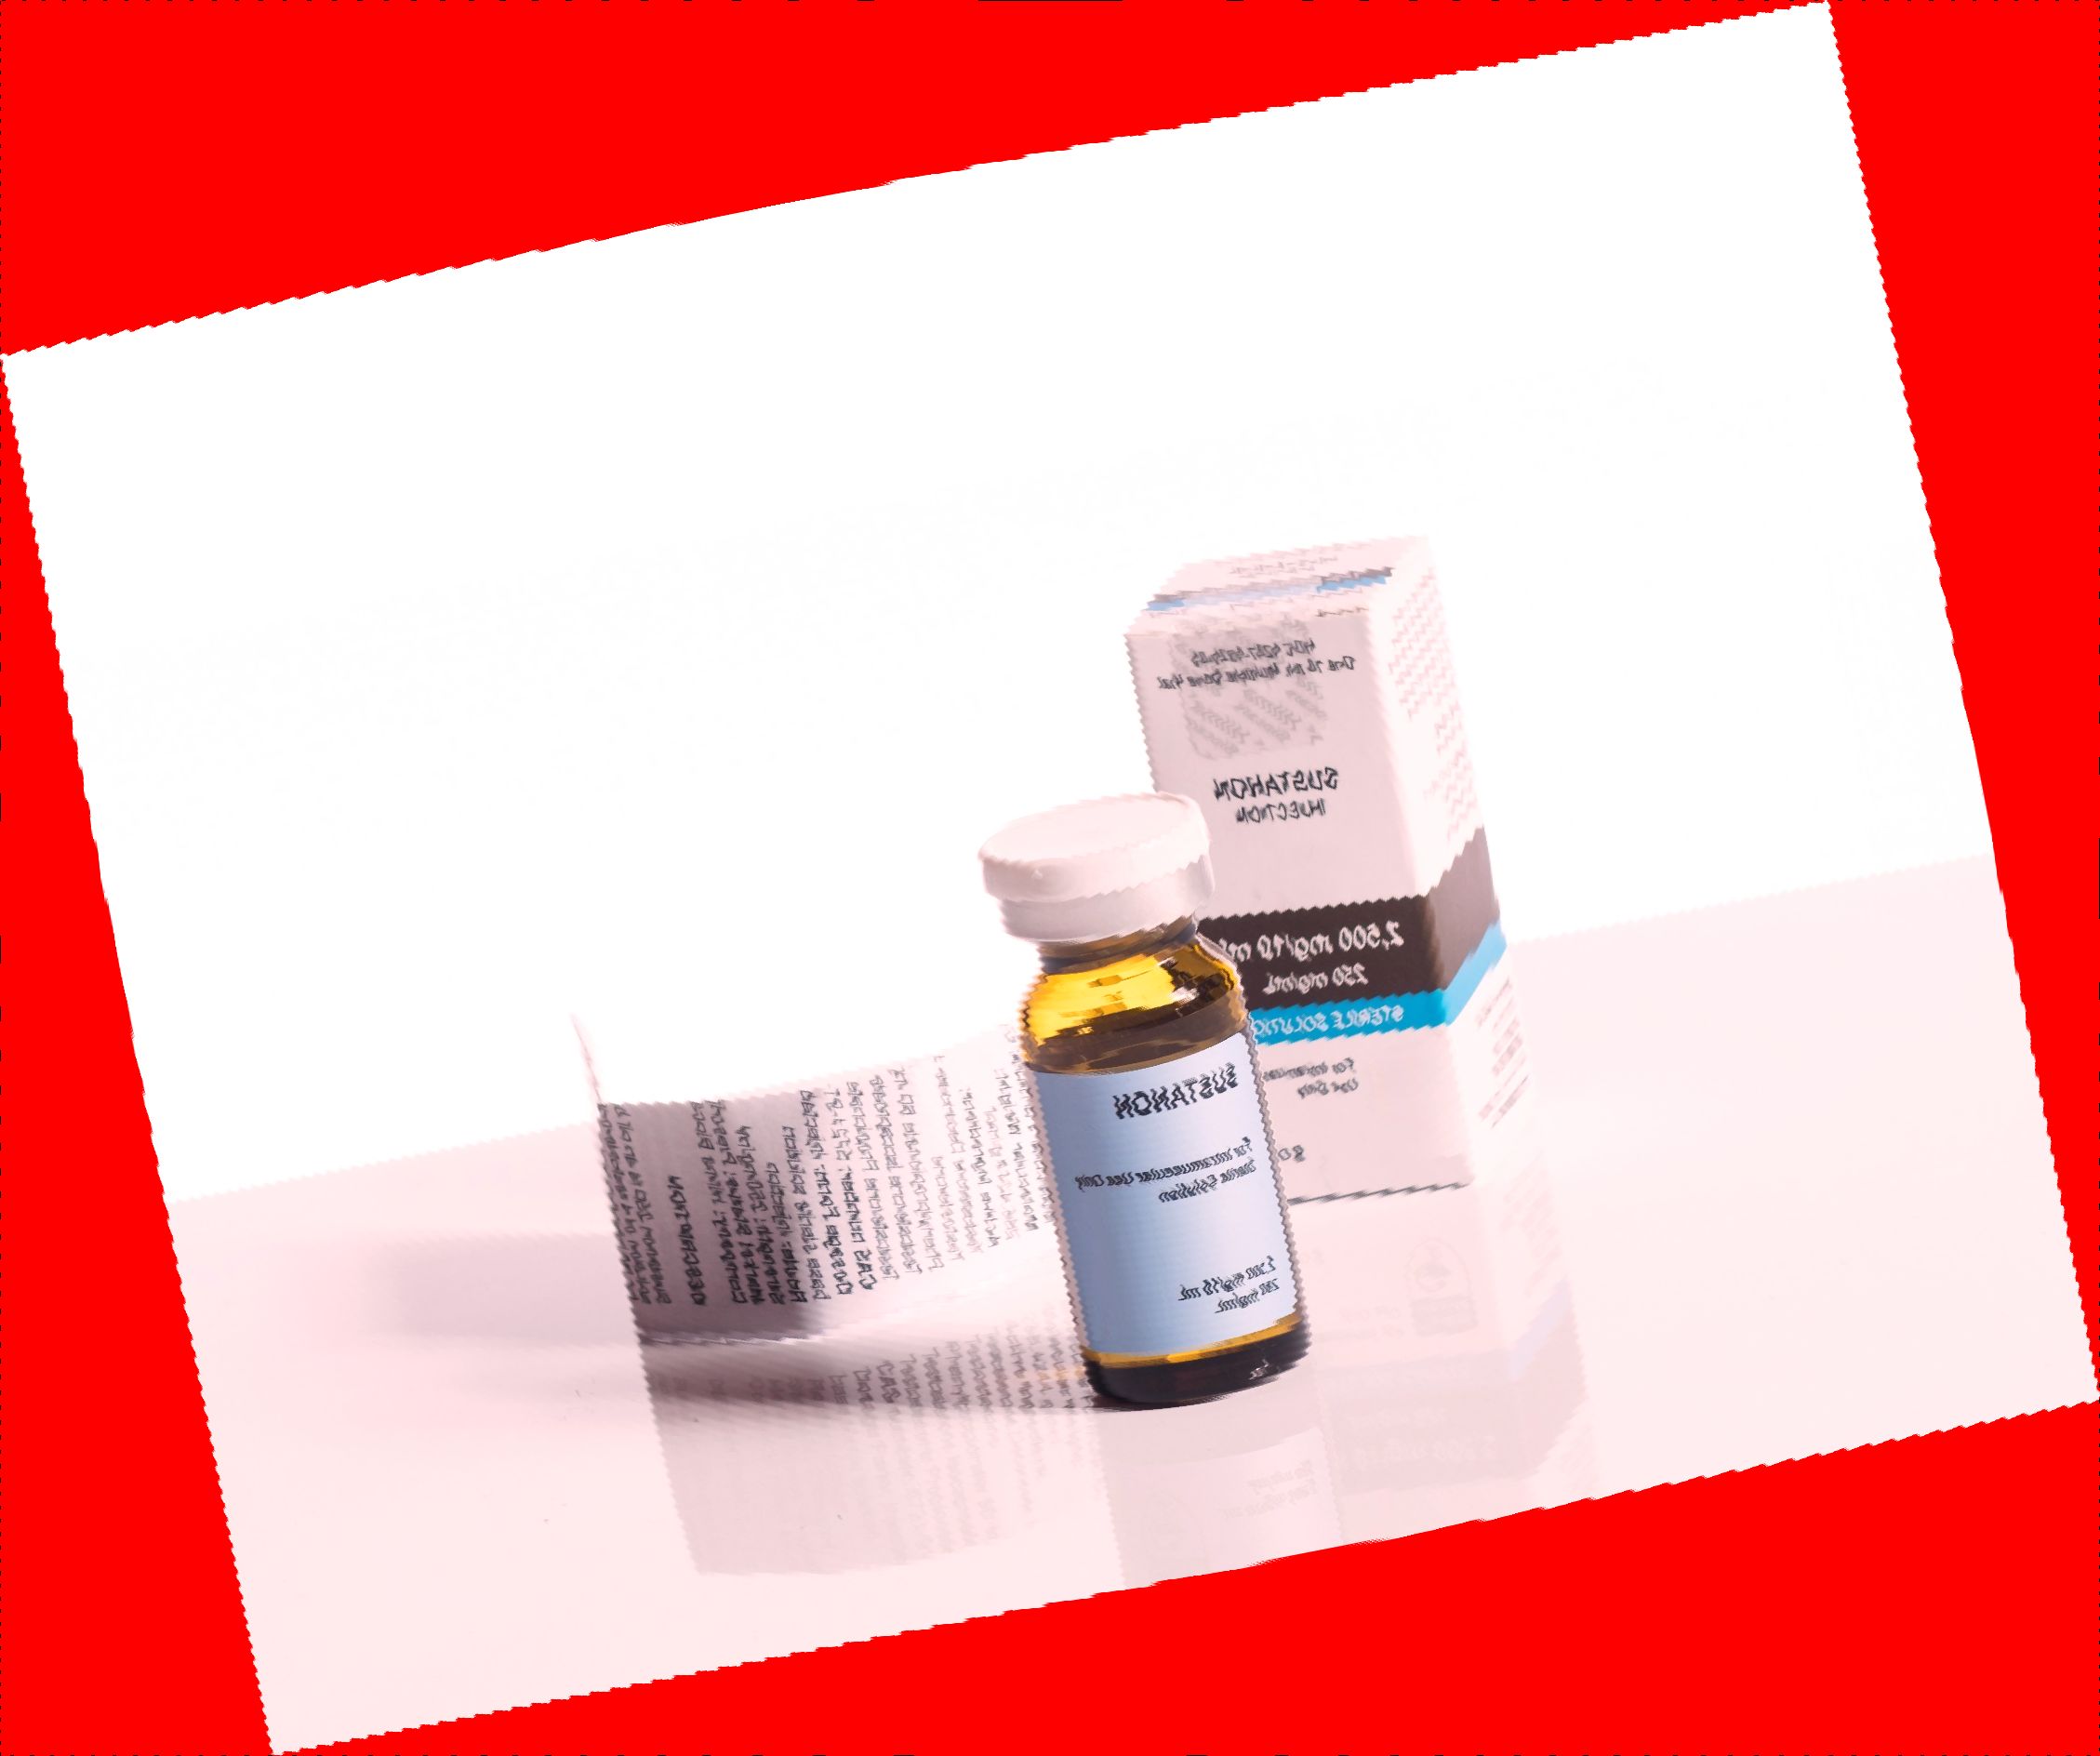 Are You Buy SP Sustanon The Best You Can? 10 Signs Of Failure